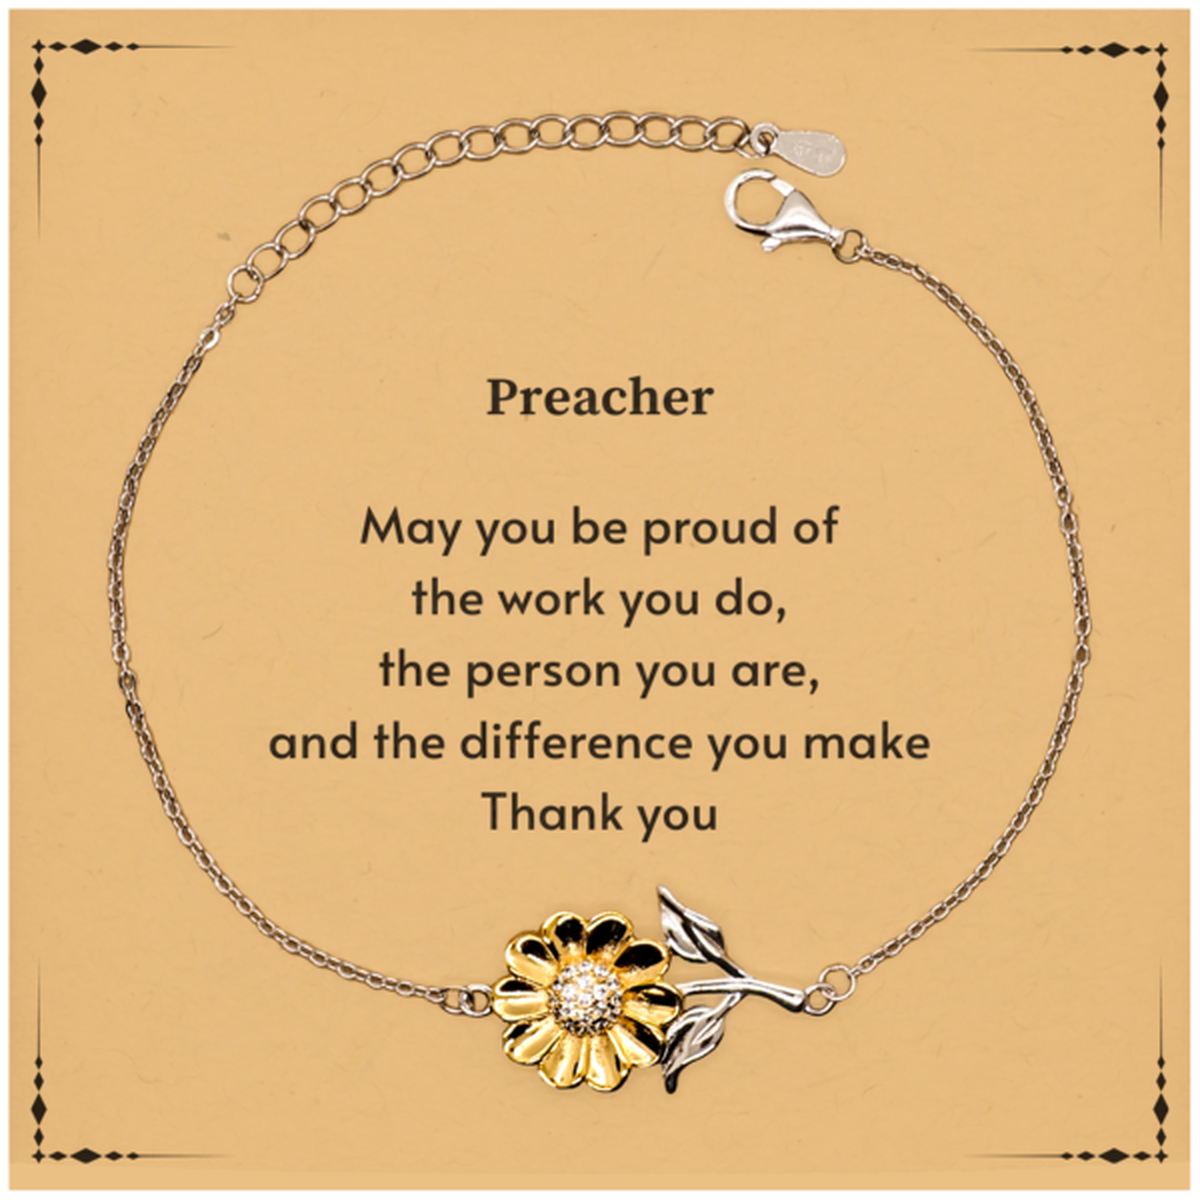 Heartwarming Sunflower Bracelet Retirement Coworkers Gifts for Preacher, Preacher May You be proud of the work you do, the person you are Gifts for Boss Men Women Friends